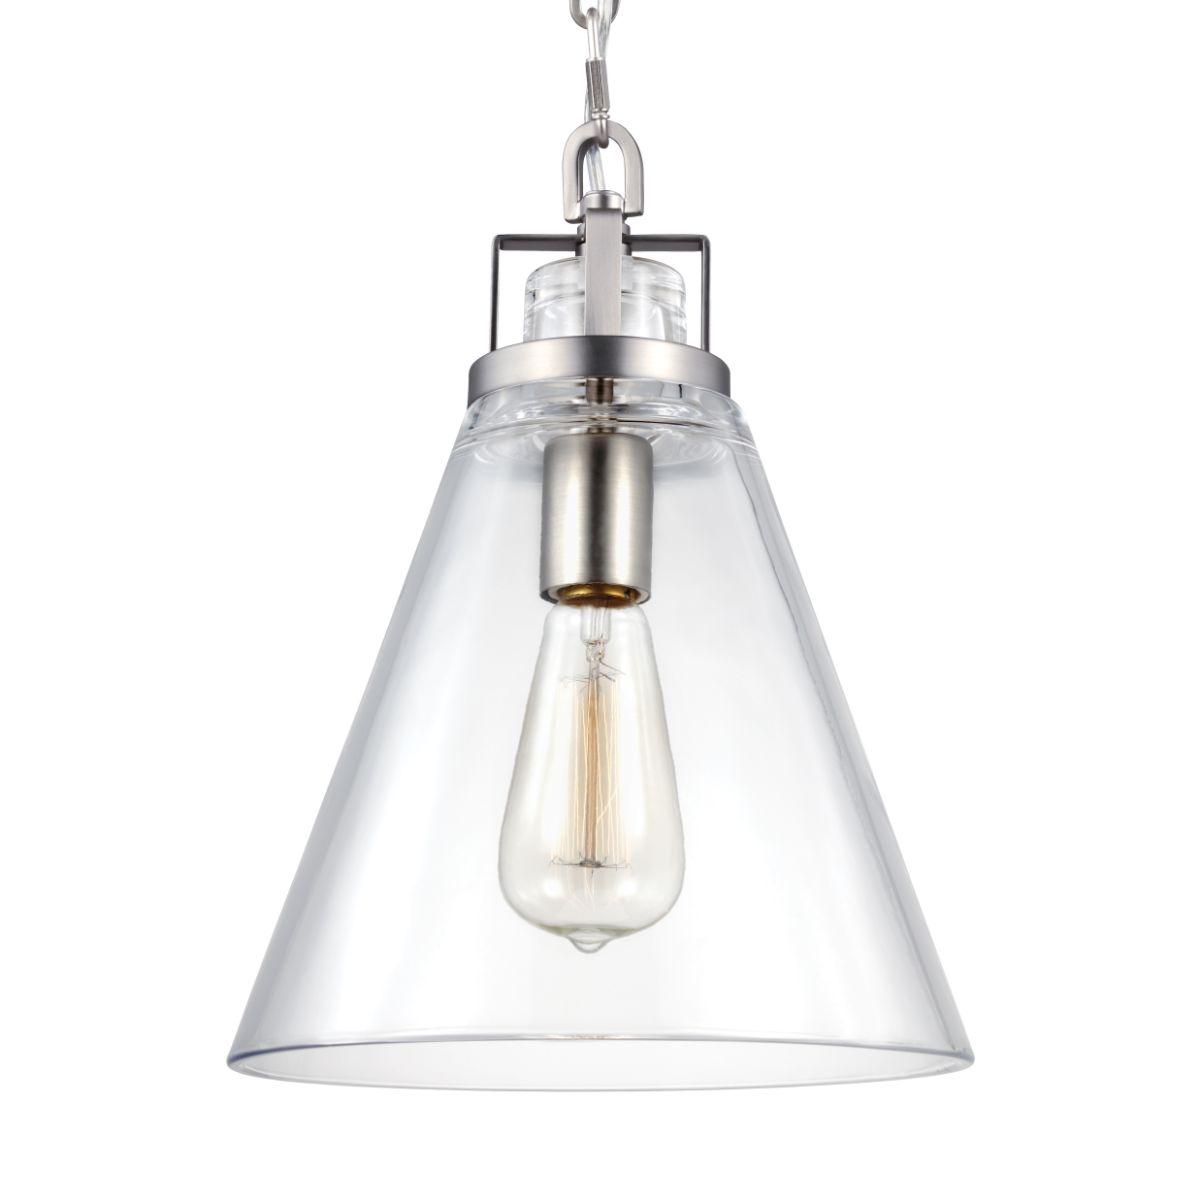 FRONTAGE 10 in. Pendant Light